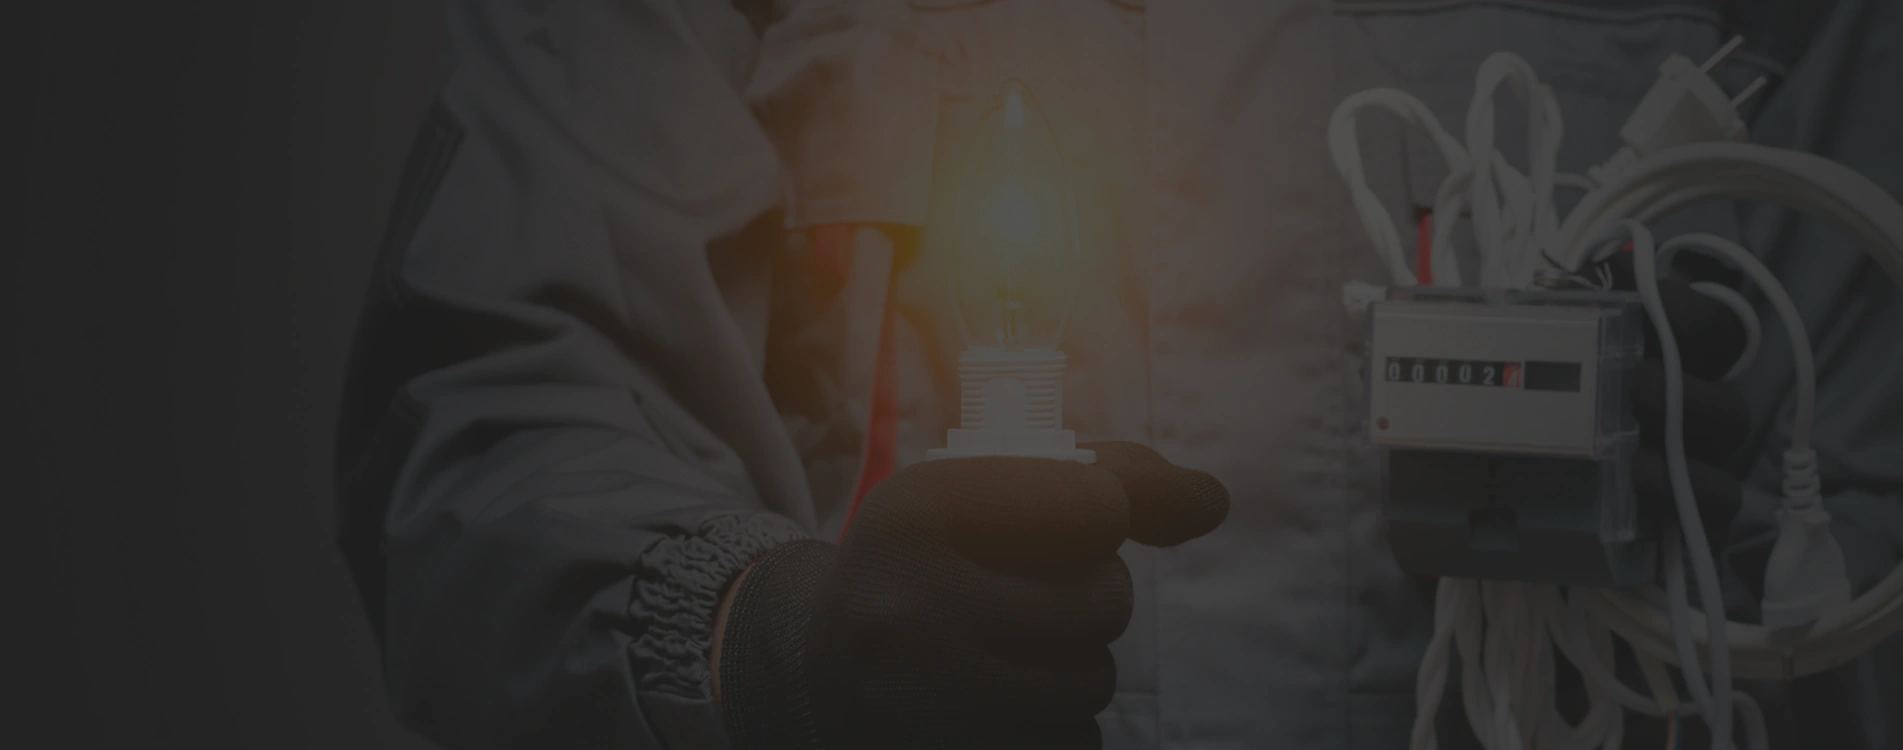 electrician holding bulb and electrical wires